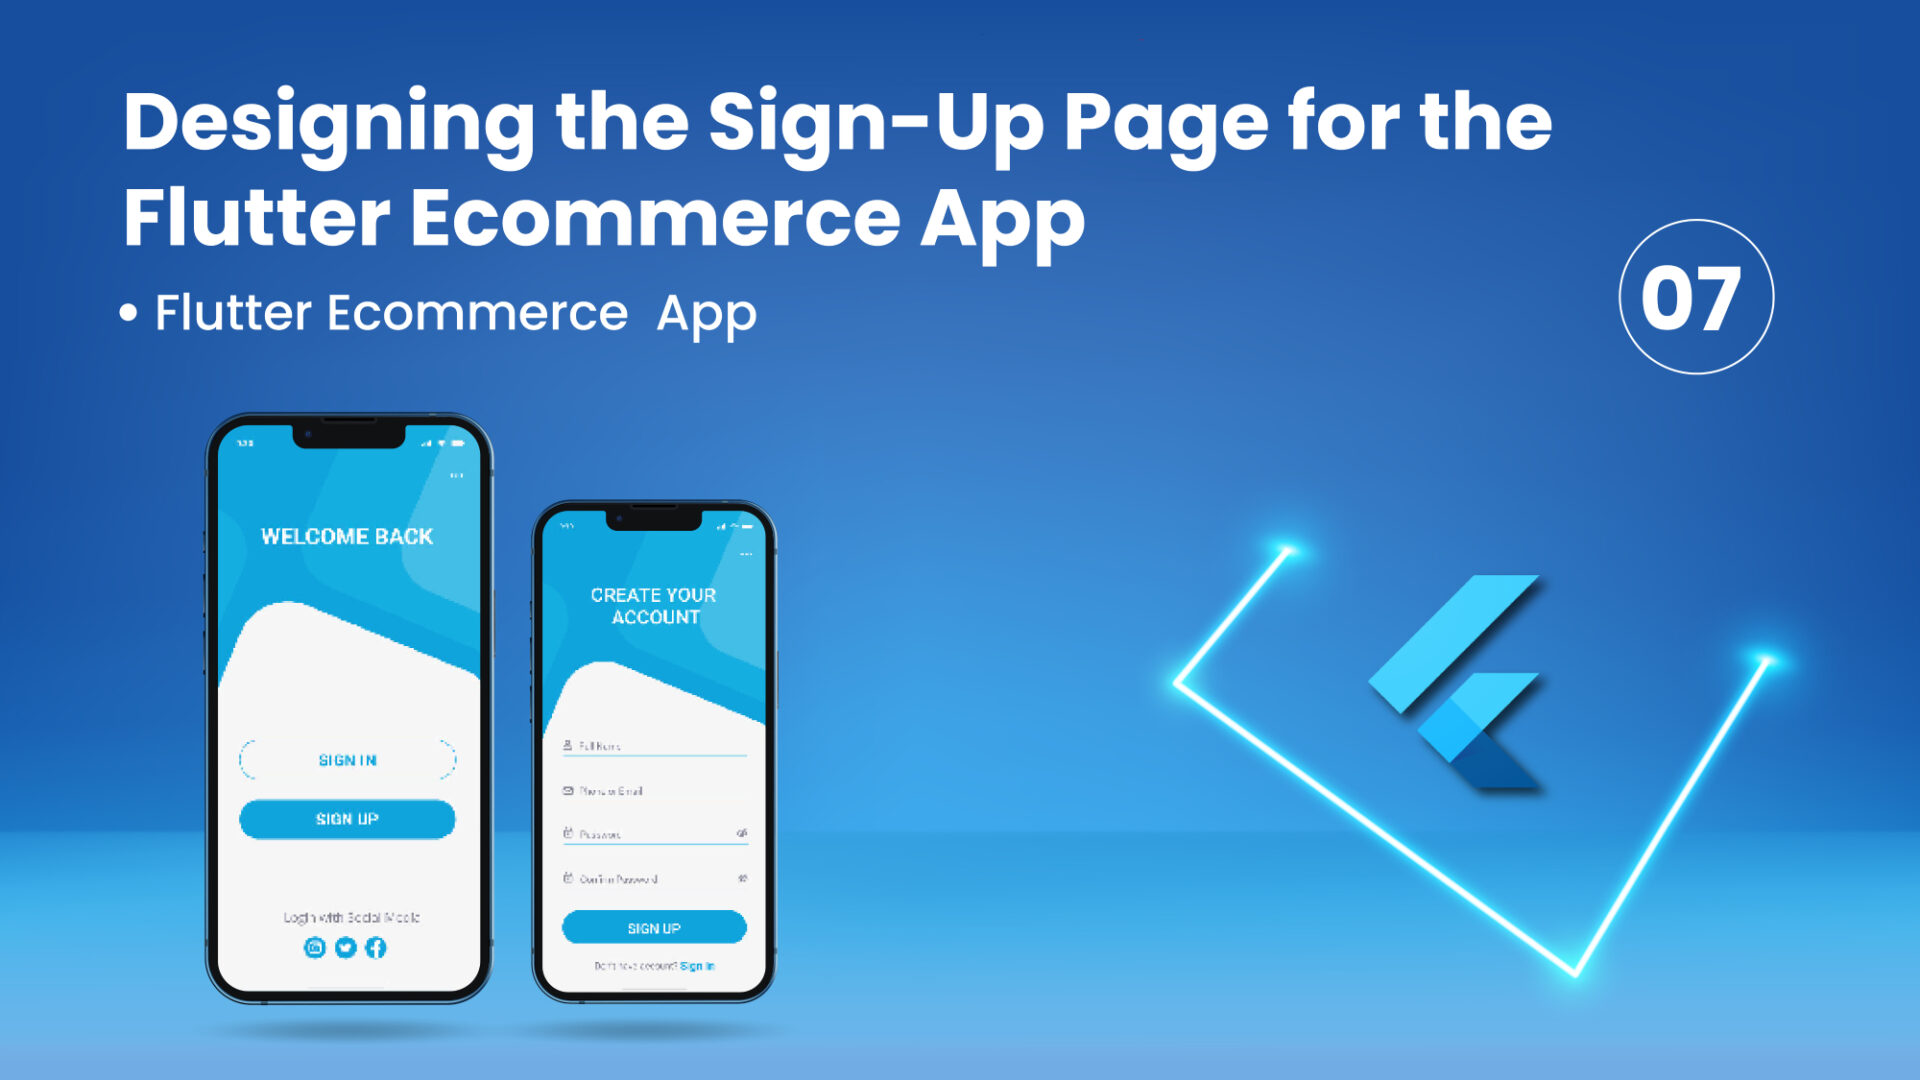 Designing the Sign-Up Page for the Flutter Ecommerce App